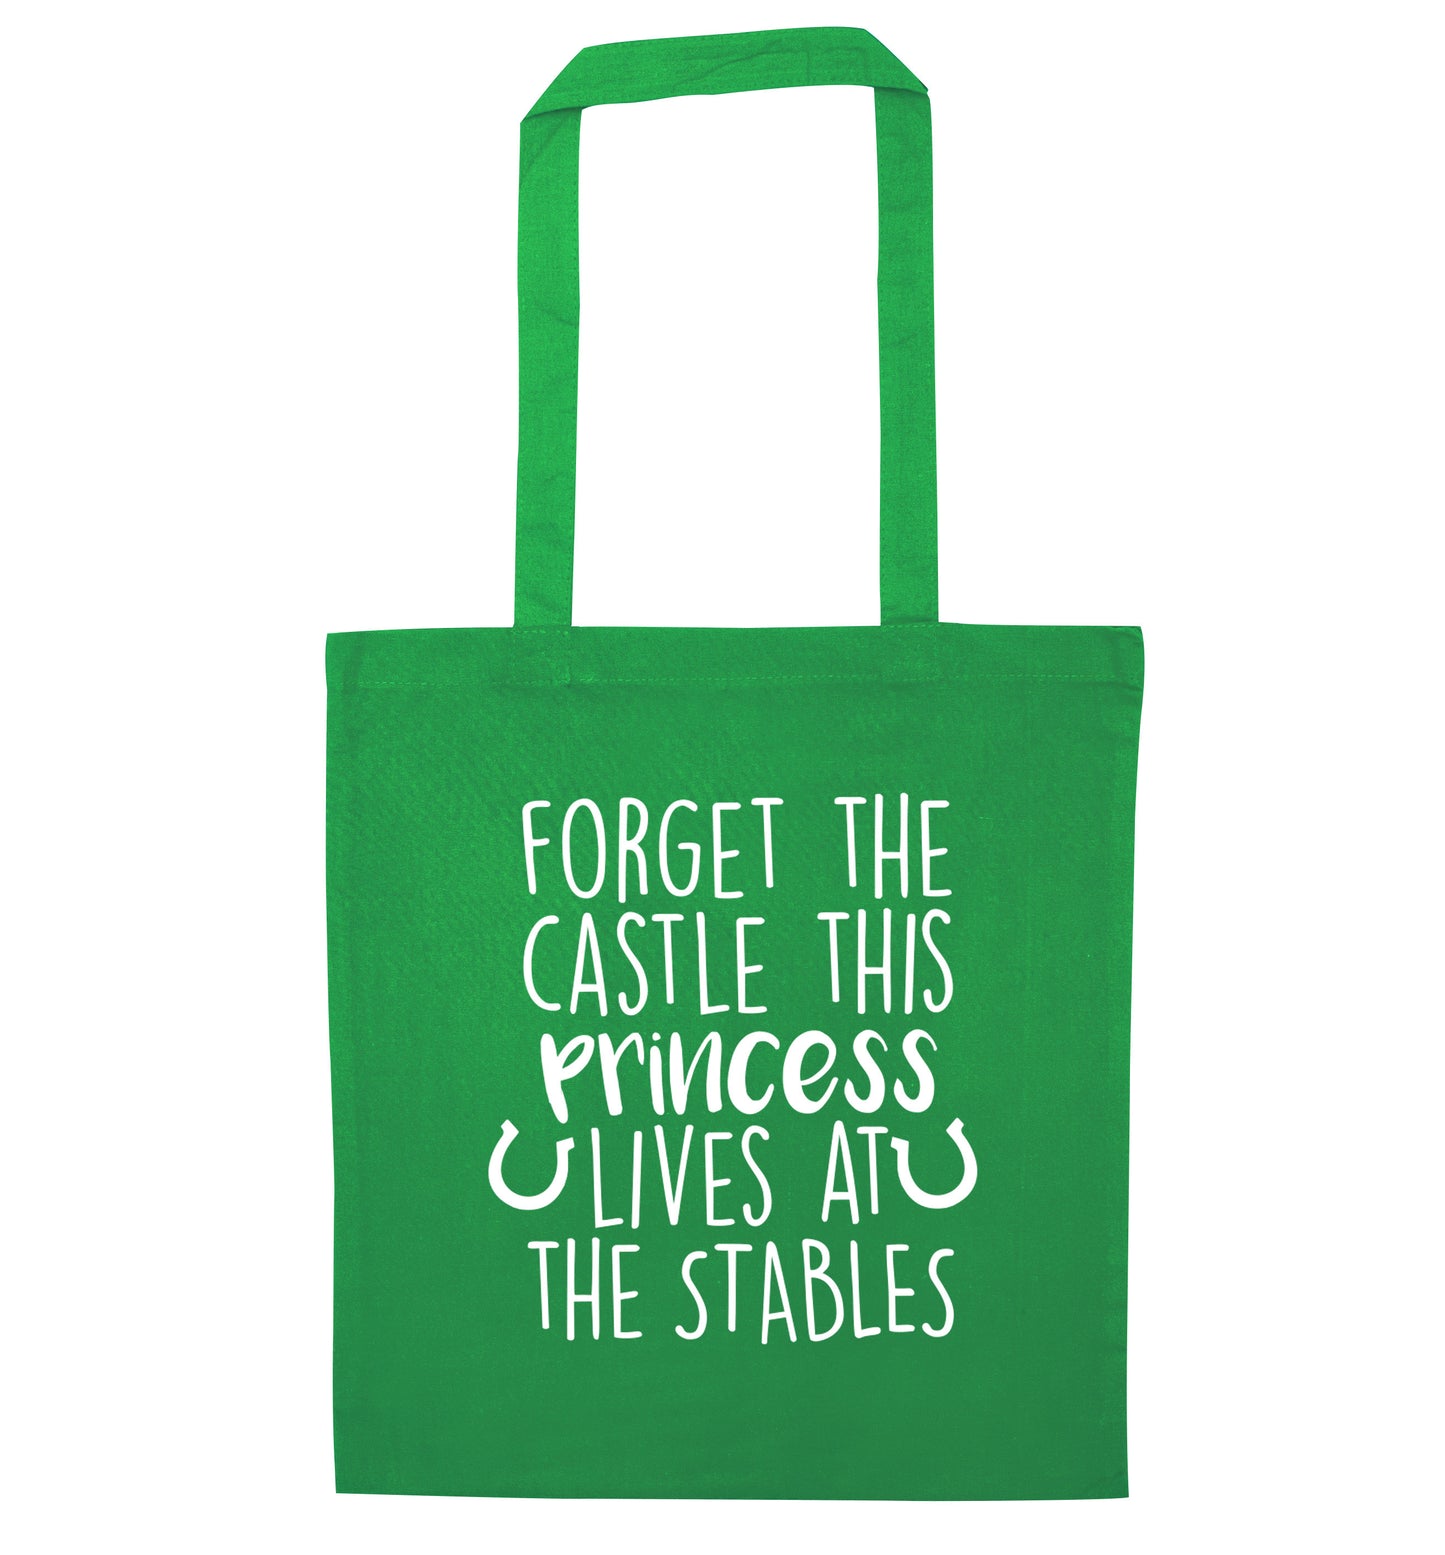 Forget the castle this princess lives at the stables green tote bag